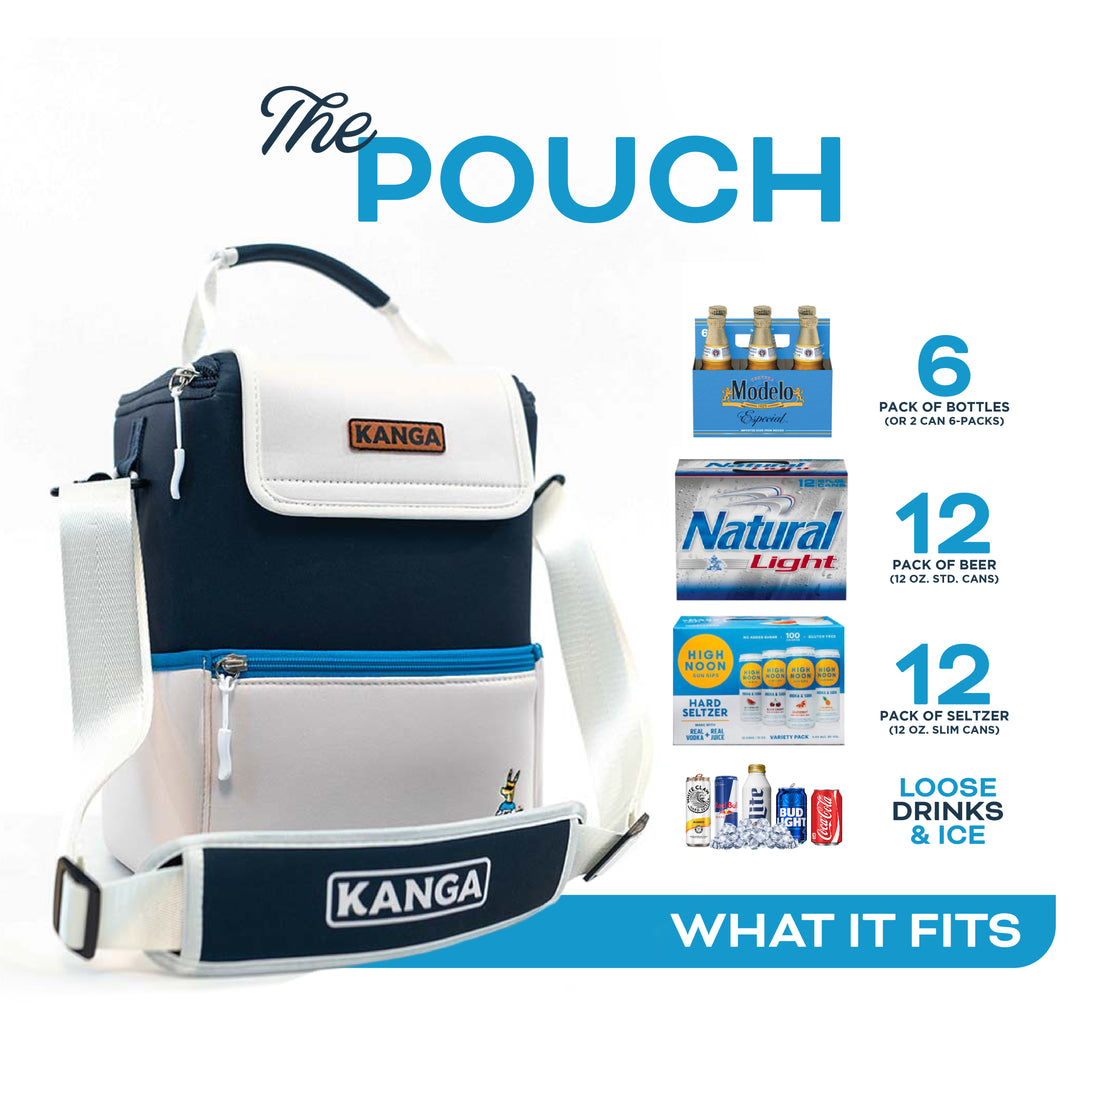 Kanga Pouch 6-12Pack Cooler